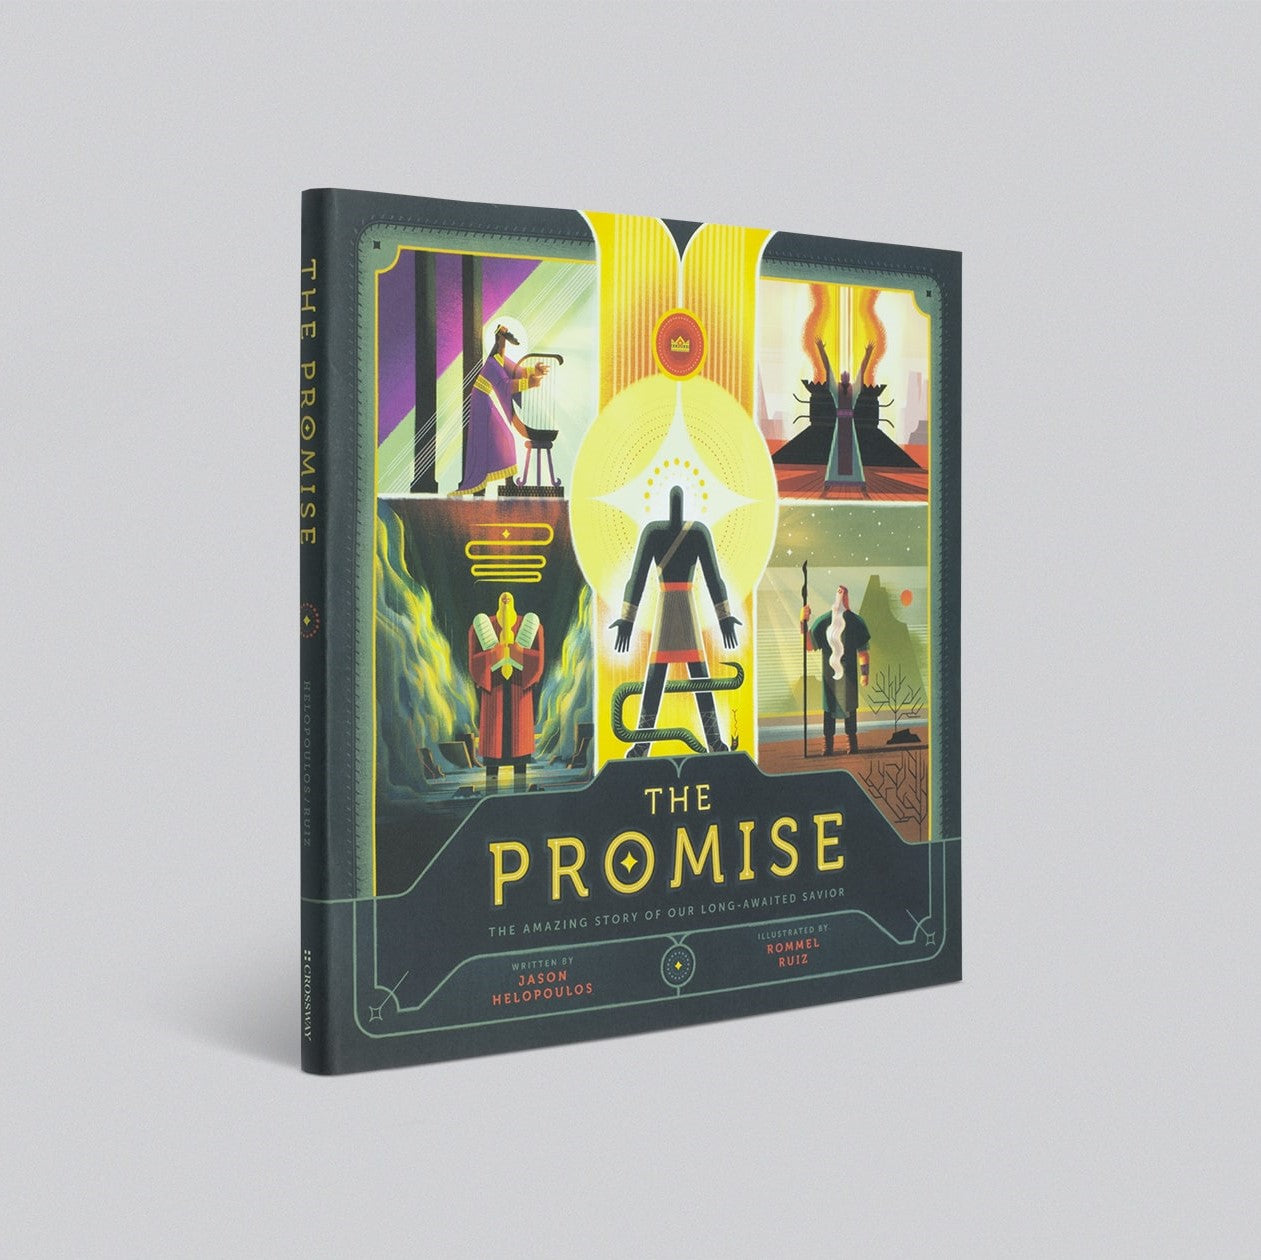 The Promise: The Amazing Story of Our Long-Awaited Savior